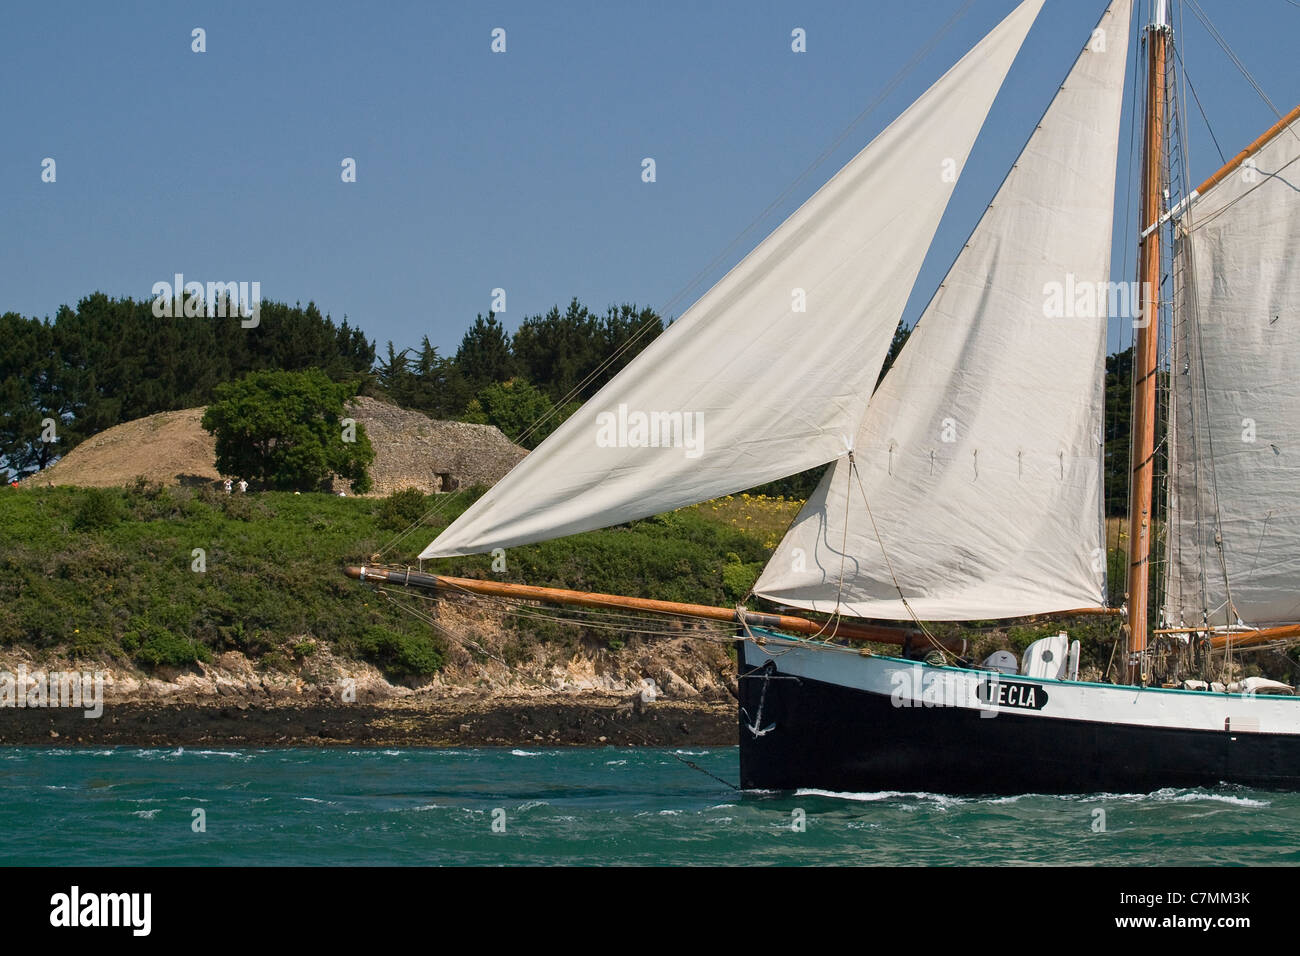 Tall ship Tecla sailing in front of a prehistoric mound. Bay of Morbihan, Brittany, France, Europe. Stock Photo